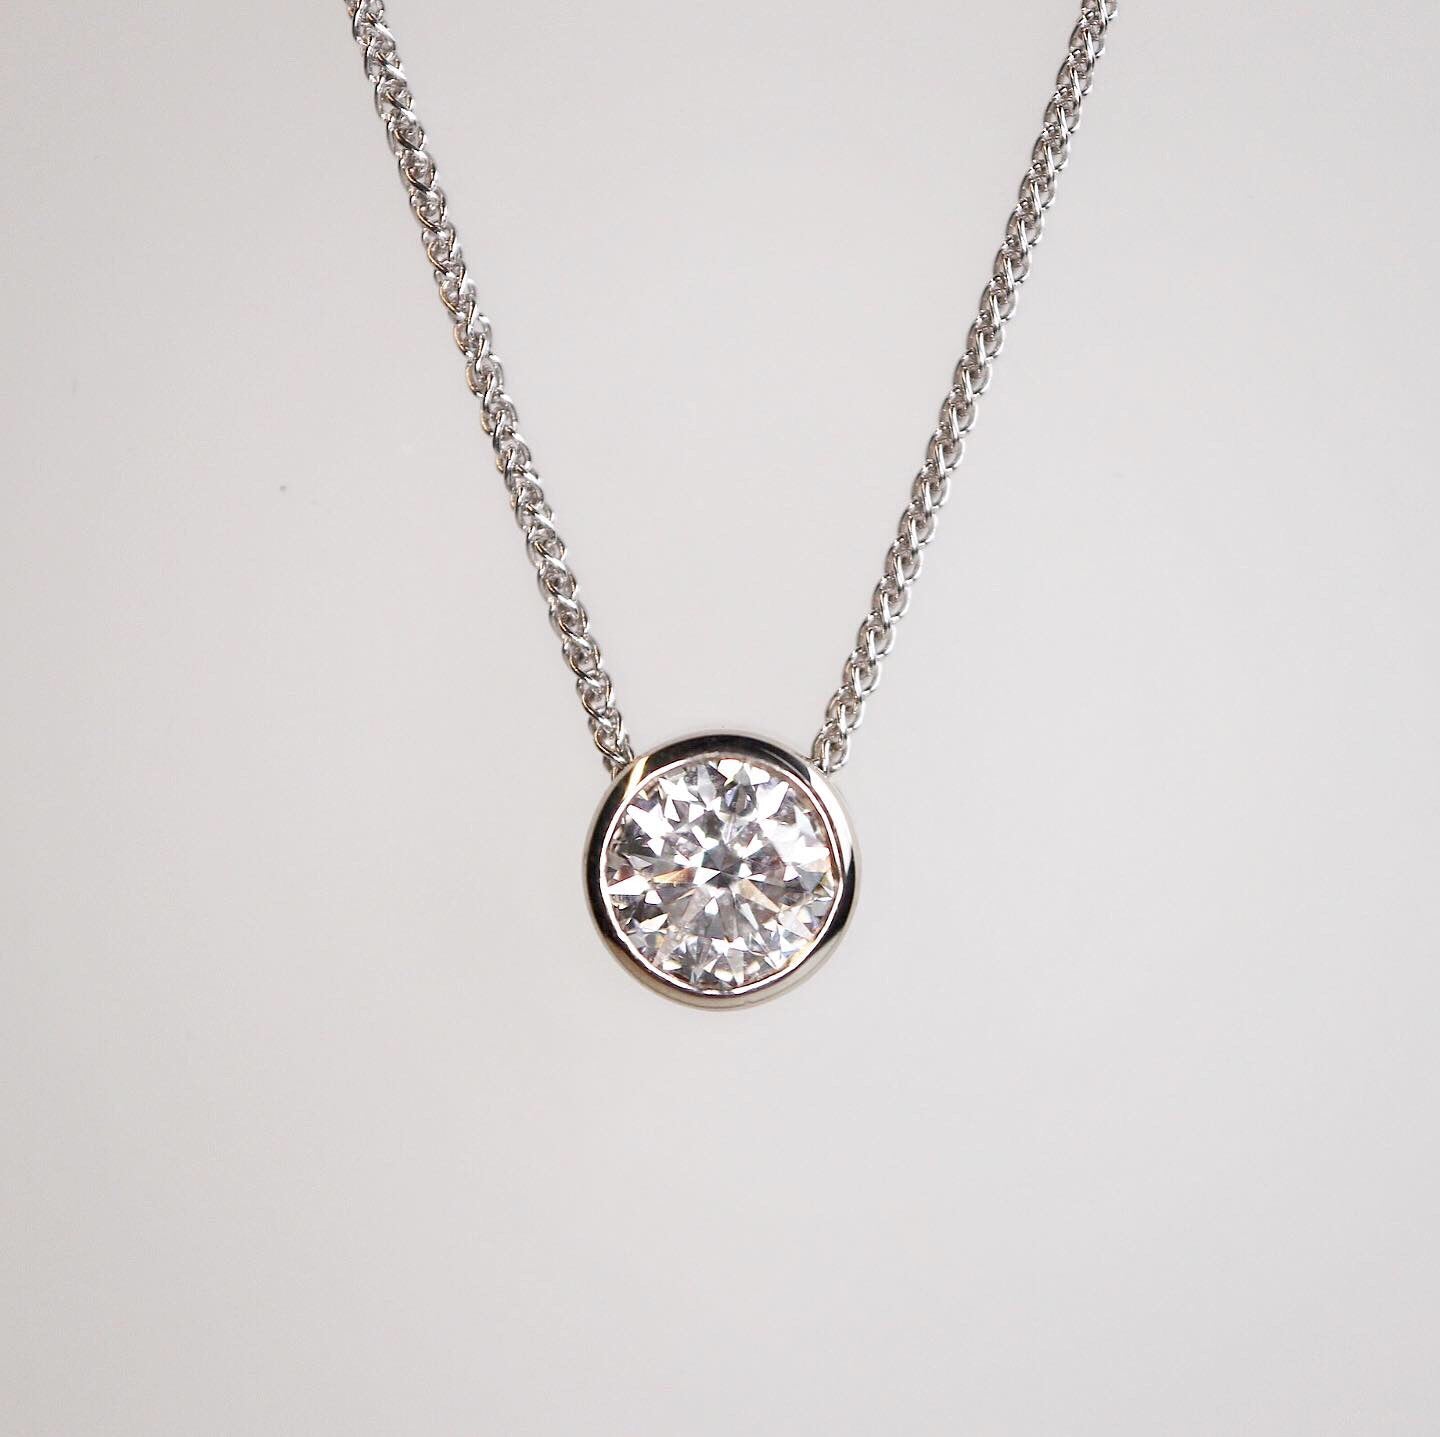 Buy Diamond Solitaire Necklace With Bezel Set 0.08 Ct. Natural Diamond /  14k Rose Gold / Floating Diamond Necklace / Girlfriend Gift Necklace Online  in India - Etsy